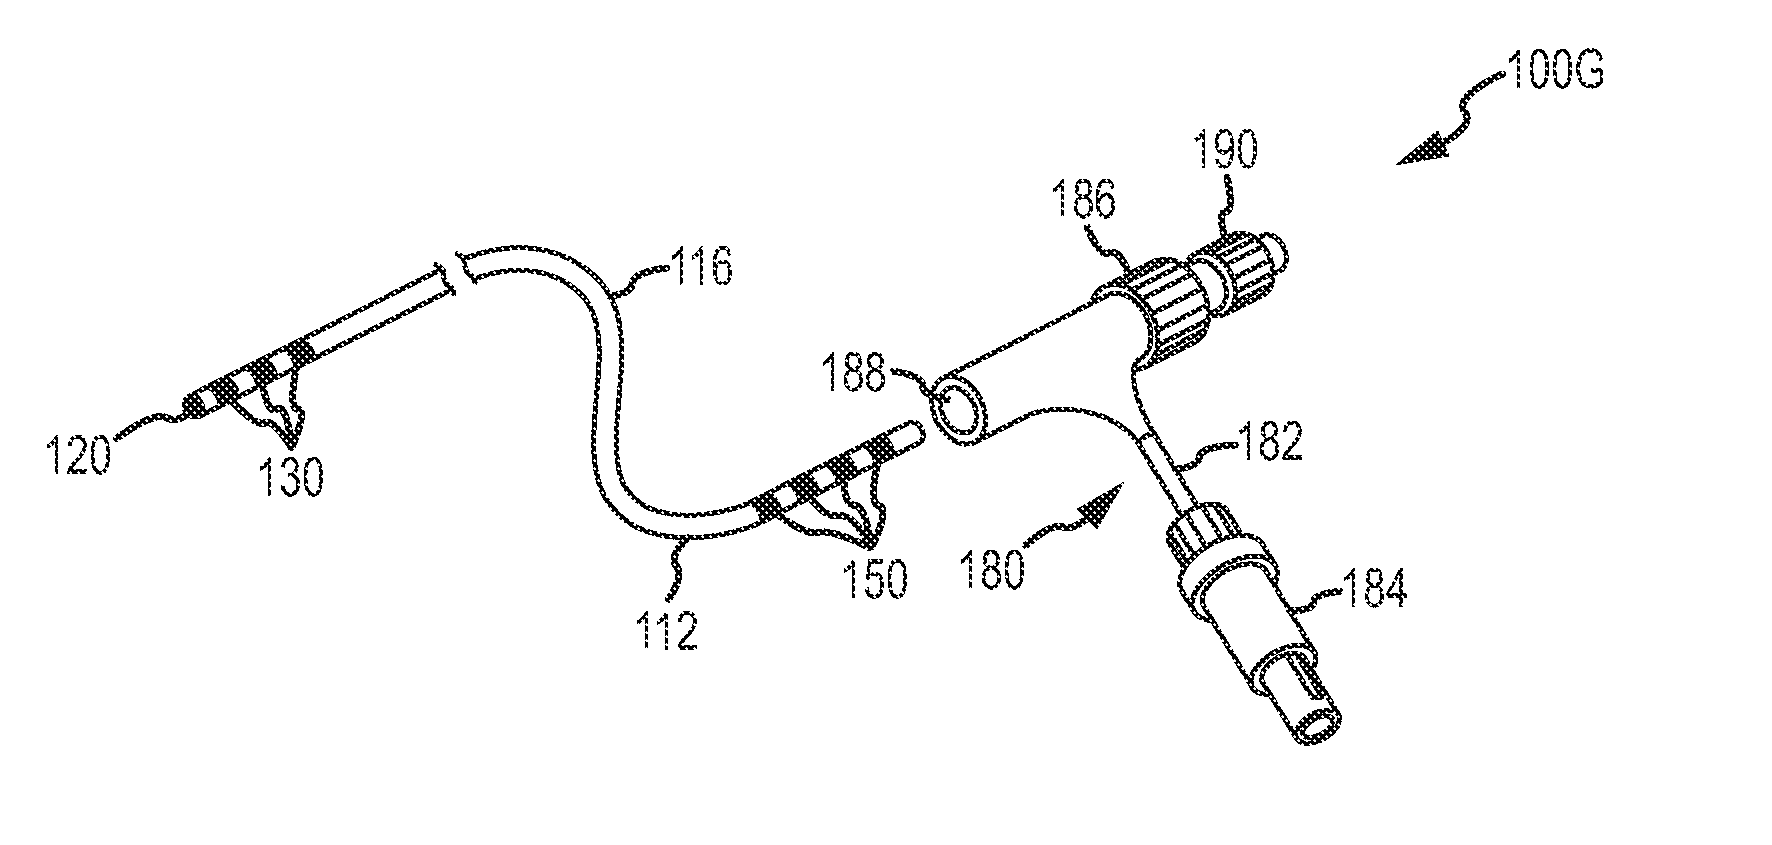 Catheter assembly with front-loaded tip and multi-contact connector